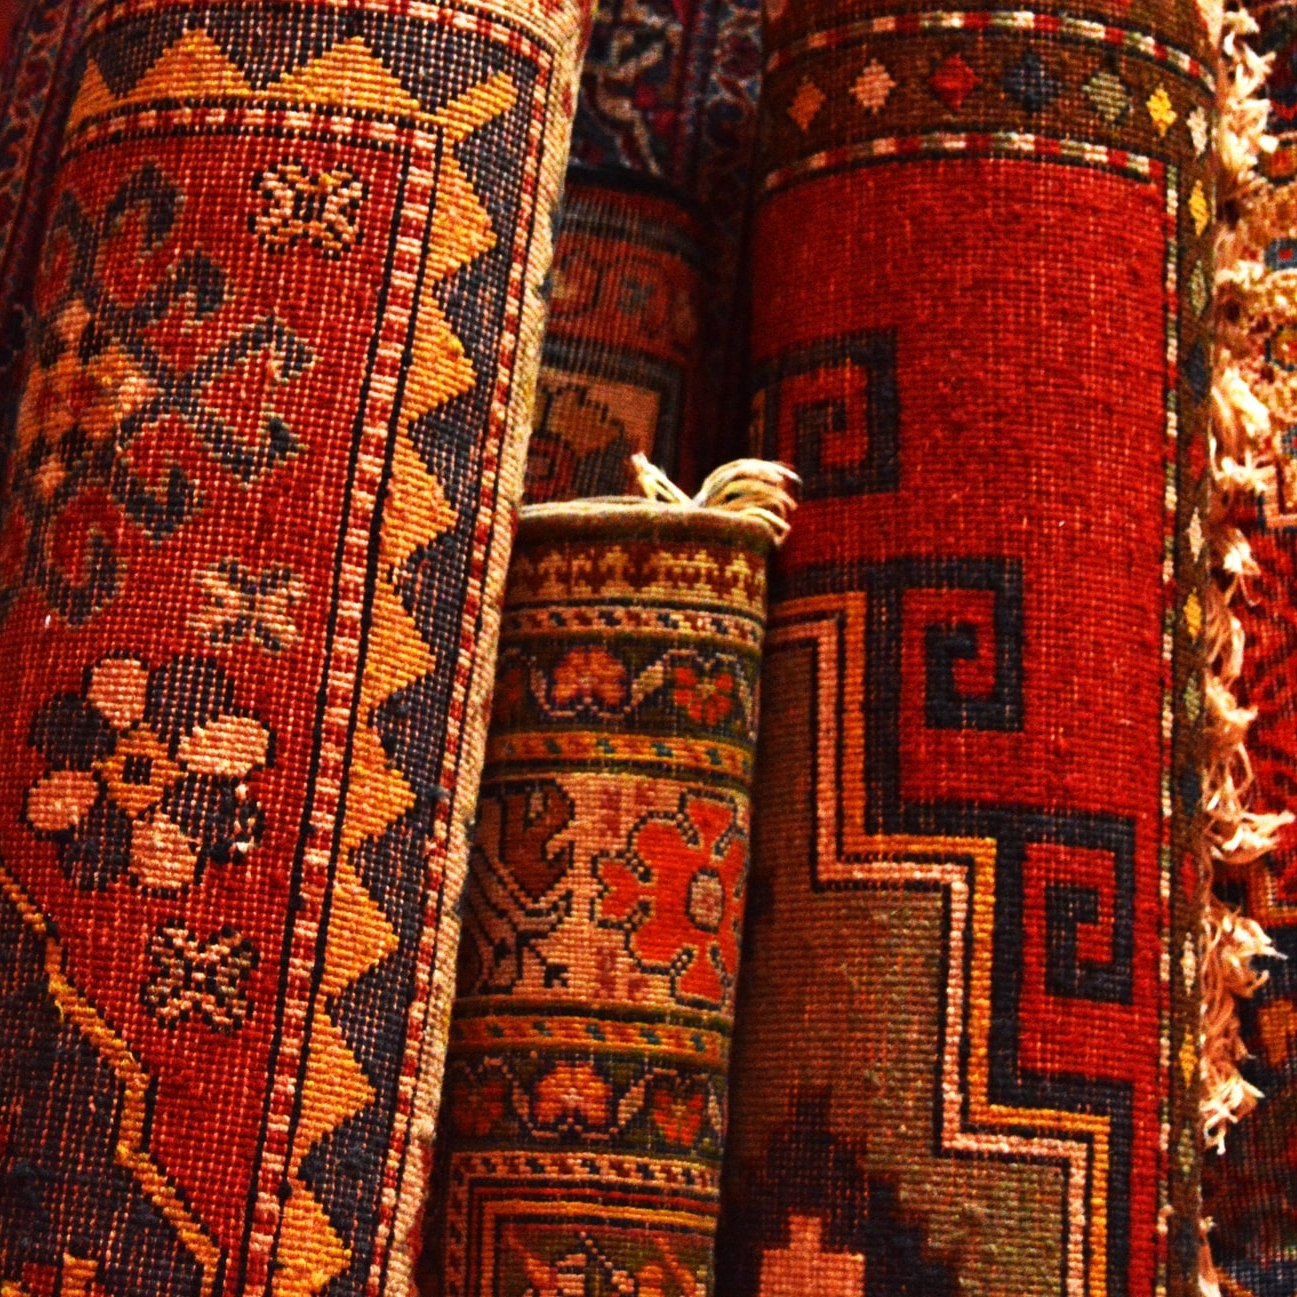 Fine Art Shippers Specializes in Packing and Shipping Fine Rugs